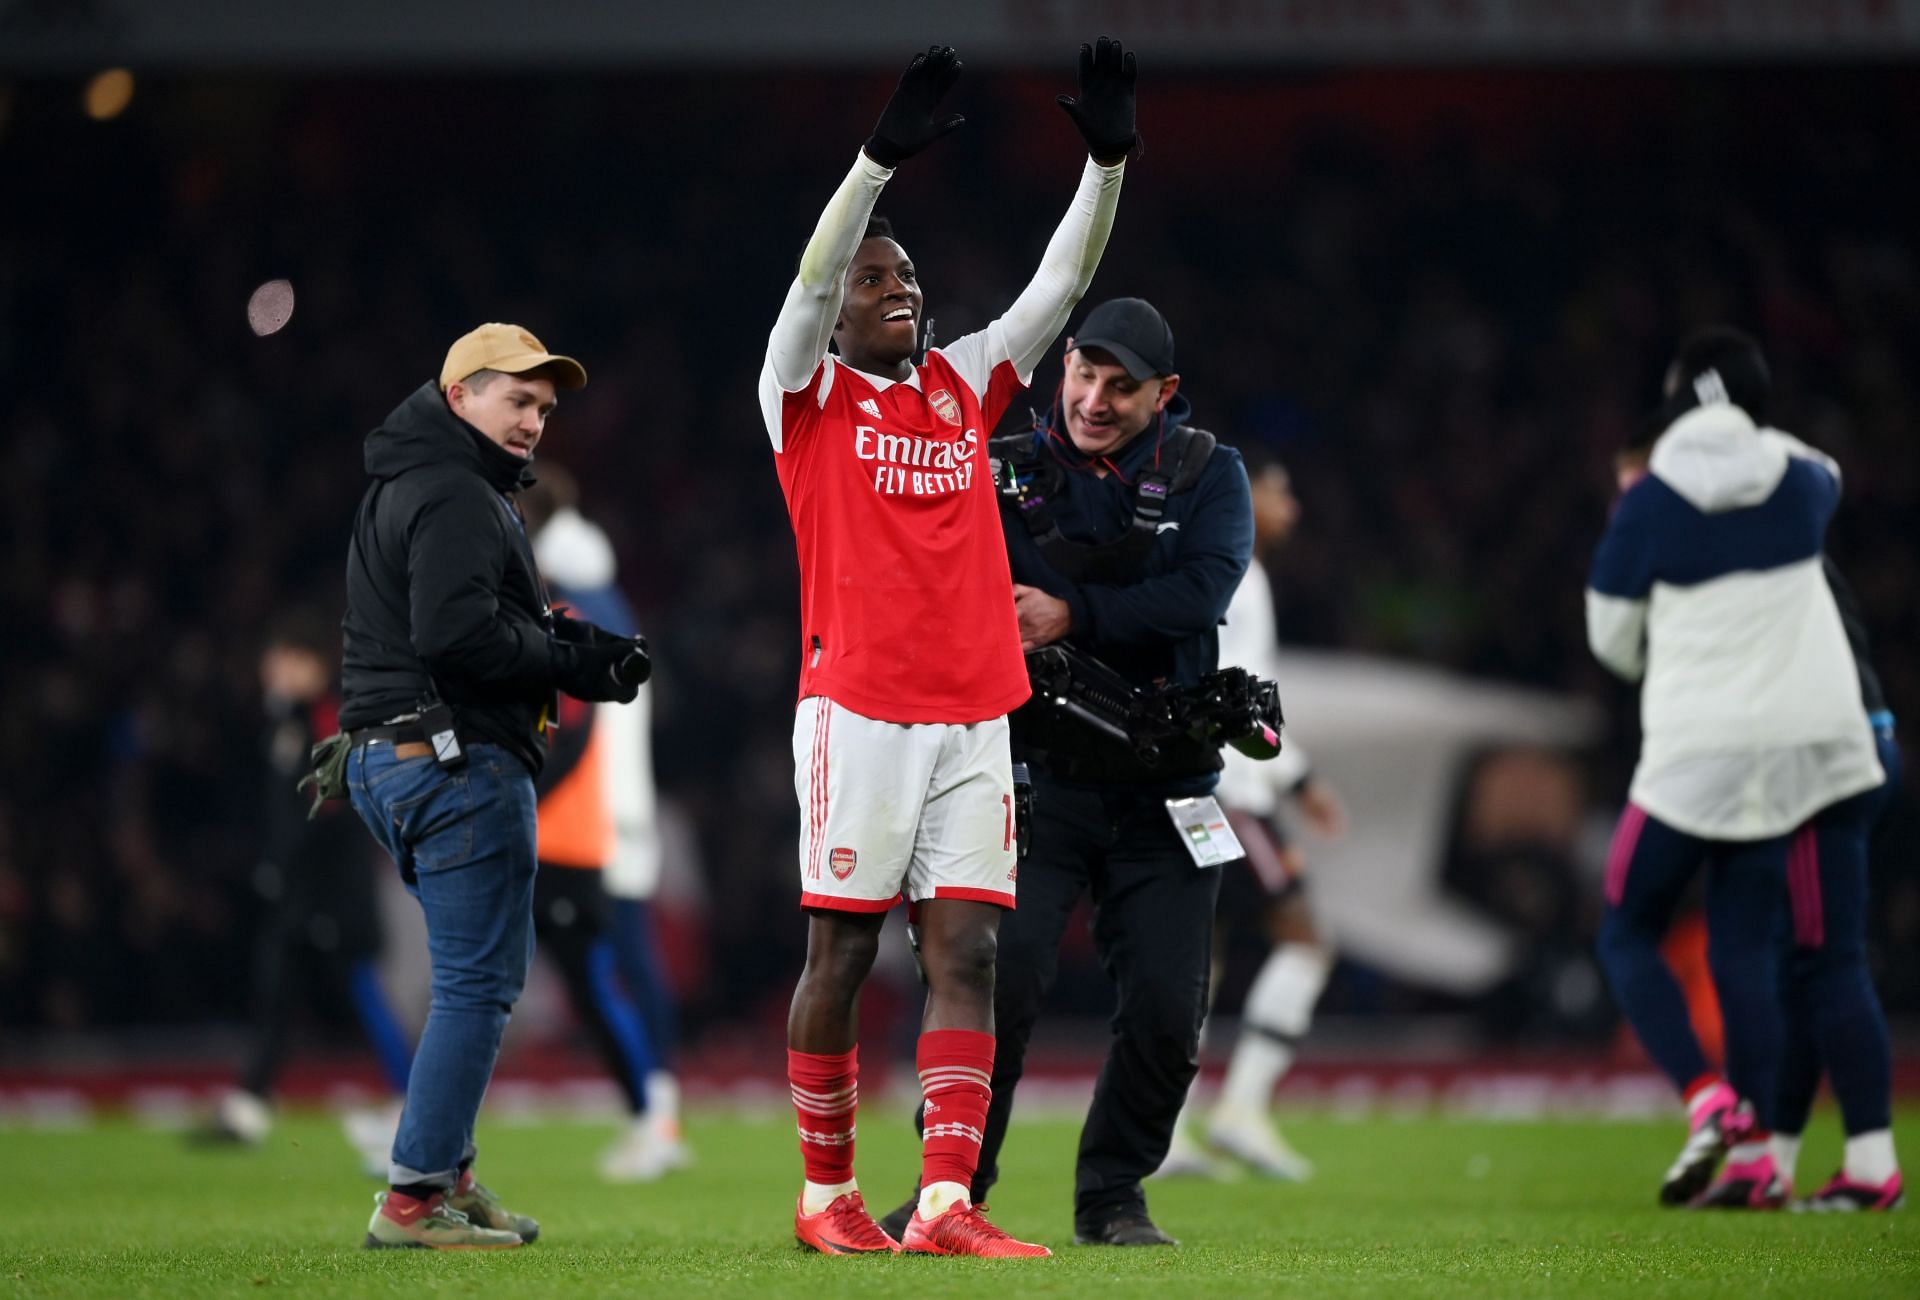 Eddie Nketiah celebrating after Arsenal's 3-2 victory over Manchester United